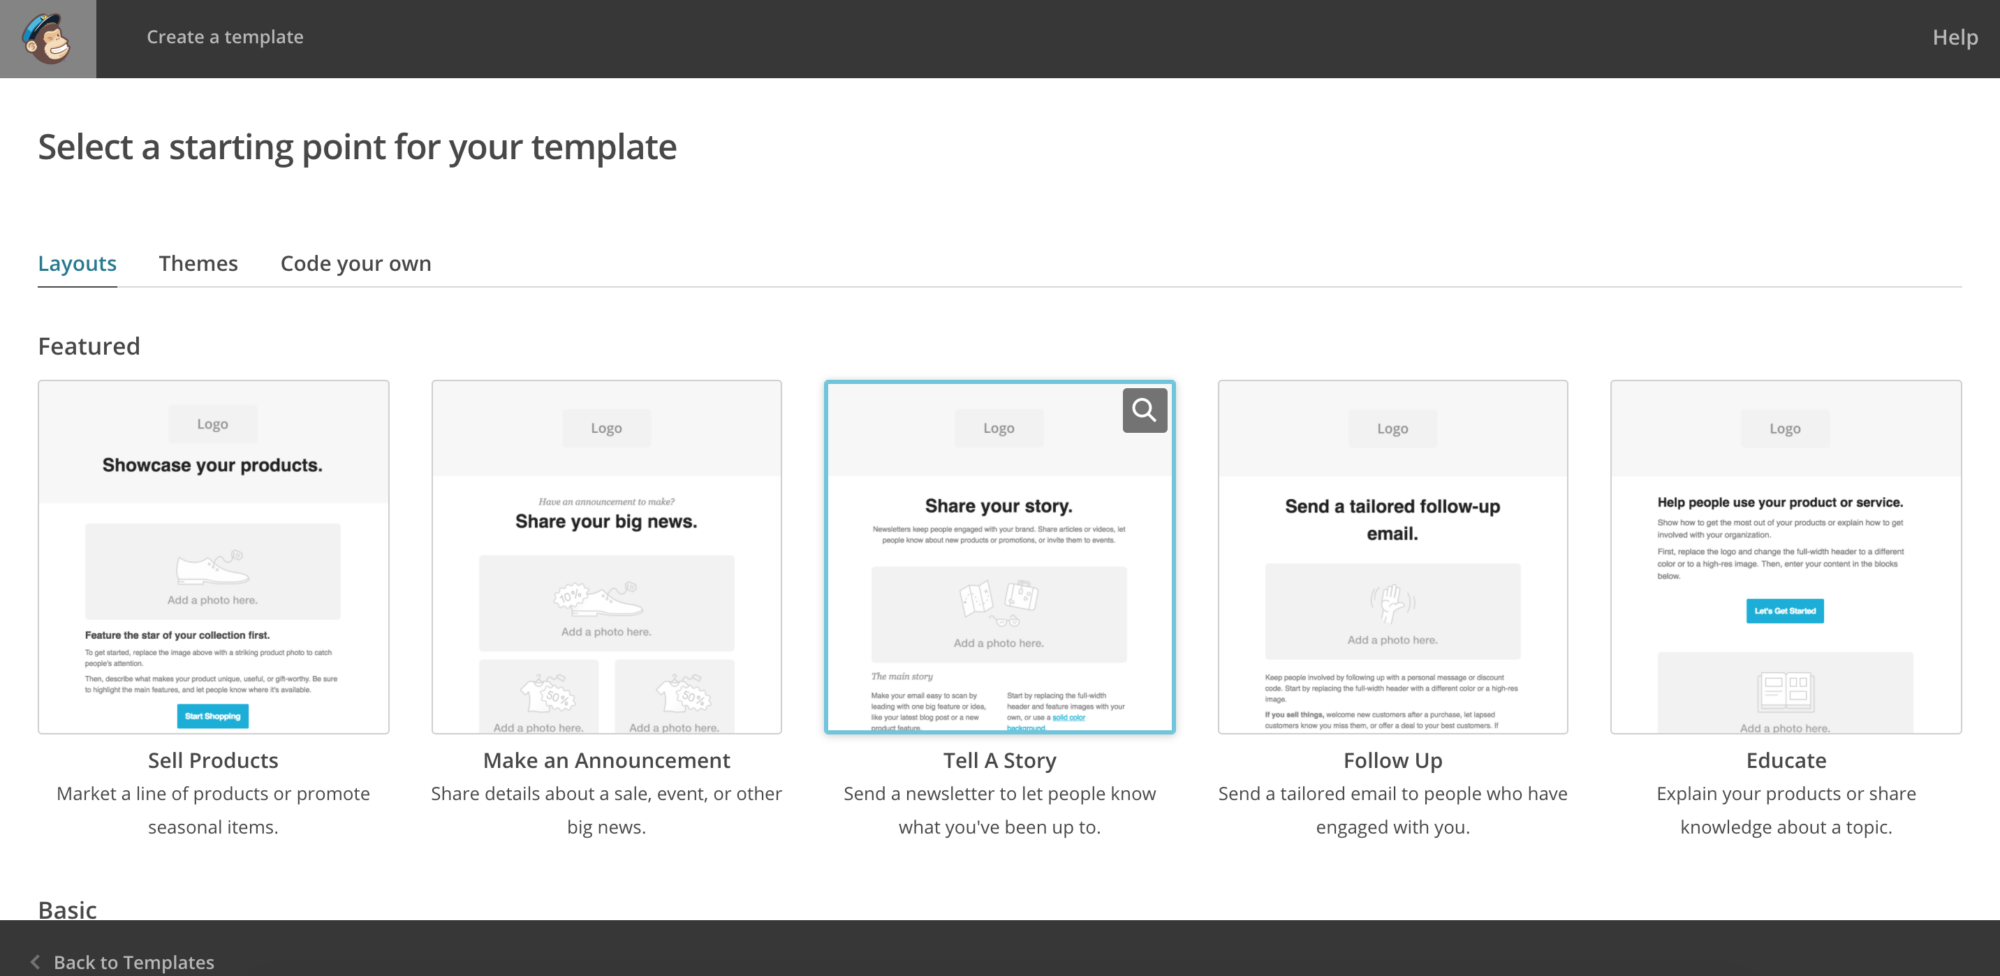 Guide for creating newsletters with the integration MailChimp